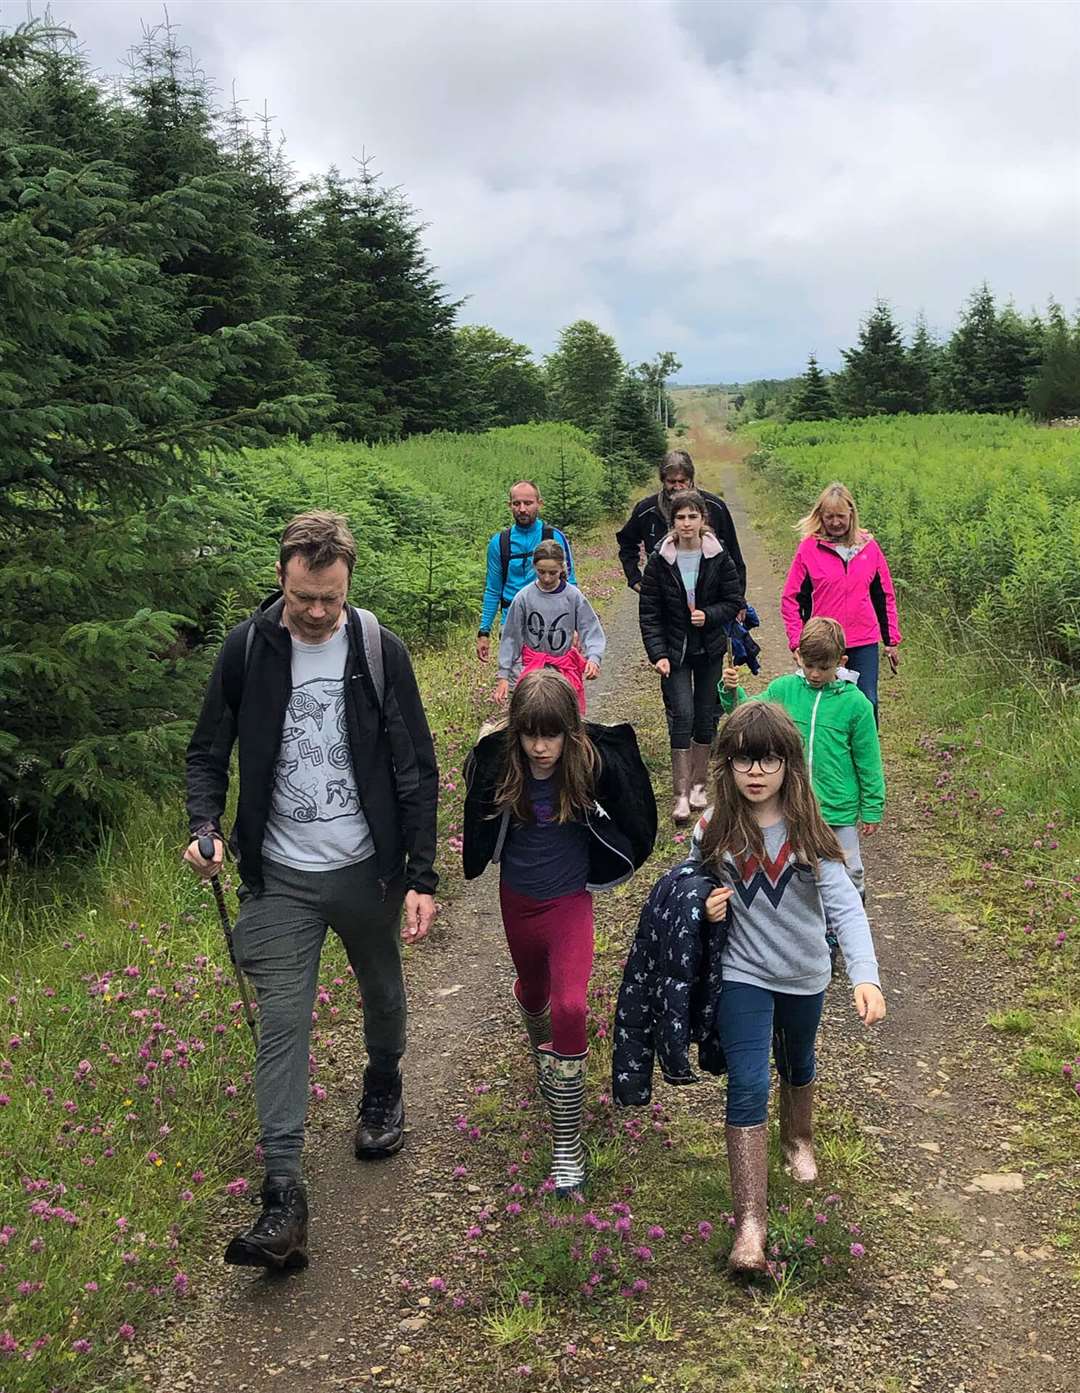 The family at Rumster Forest setting off on their walk to raise funds for pancreatic cancer in aid of Melanie Spirit, who passed away in October year. At the front, from left, are Adrian Fell, Isla Fell Cano and her sister Lizzie, with Nina Spirit-Hawthorne behind along with Sofia Fell Cano and Leon Spirit-Hawthorne in the green jacket. Taking up the rear are adults Derek Hawthorne, Angus Spirit and Wendy Mackay.